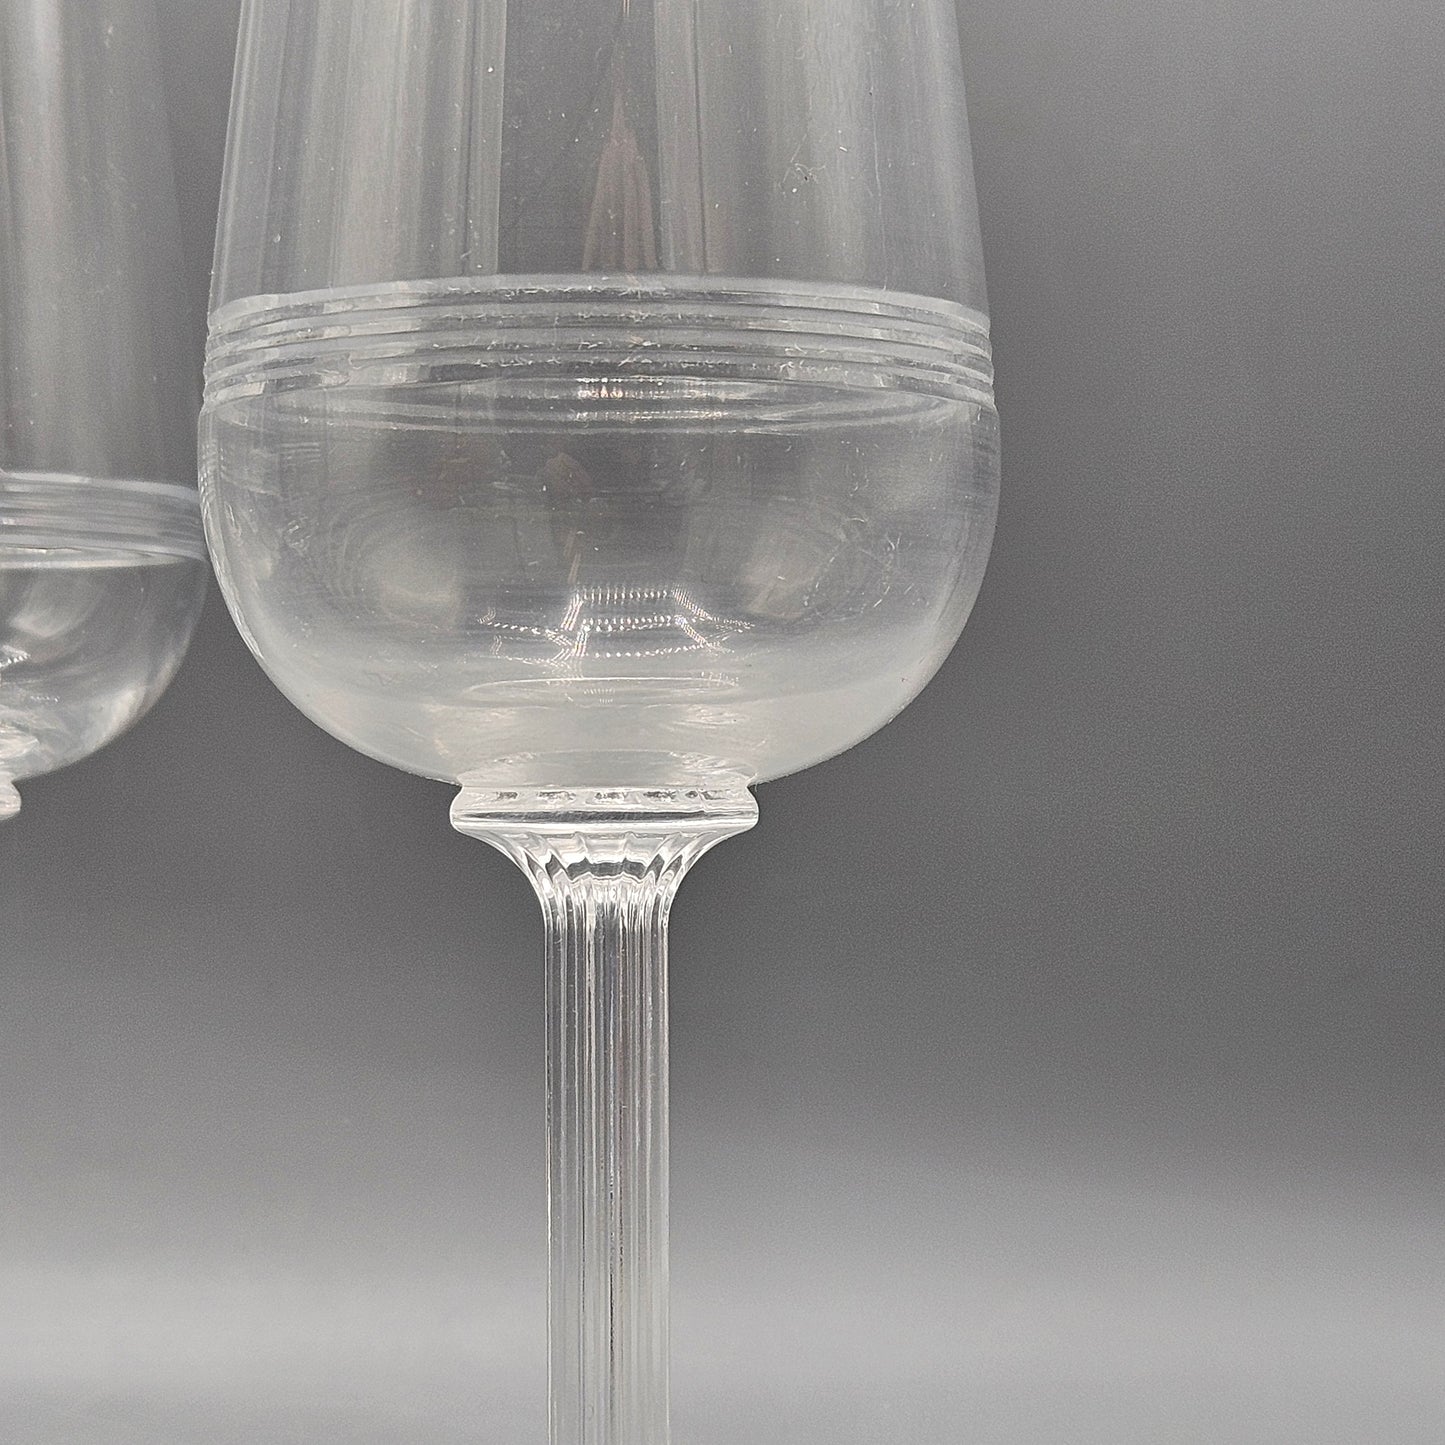 Stunning Set of 4  Fluted Champagne Athena Glasses by Baccarat